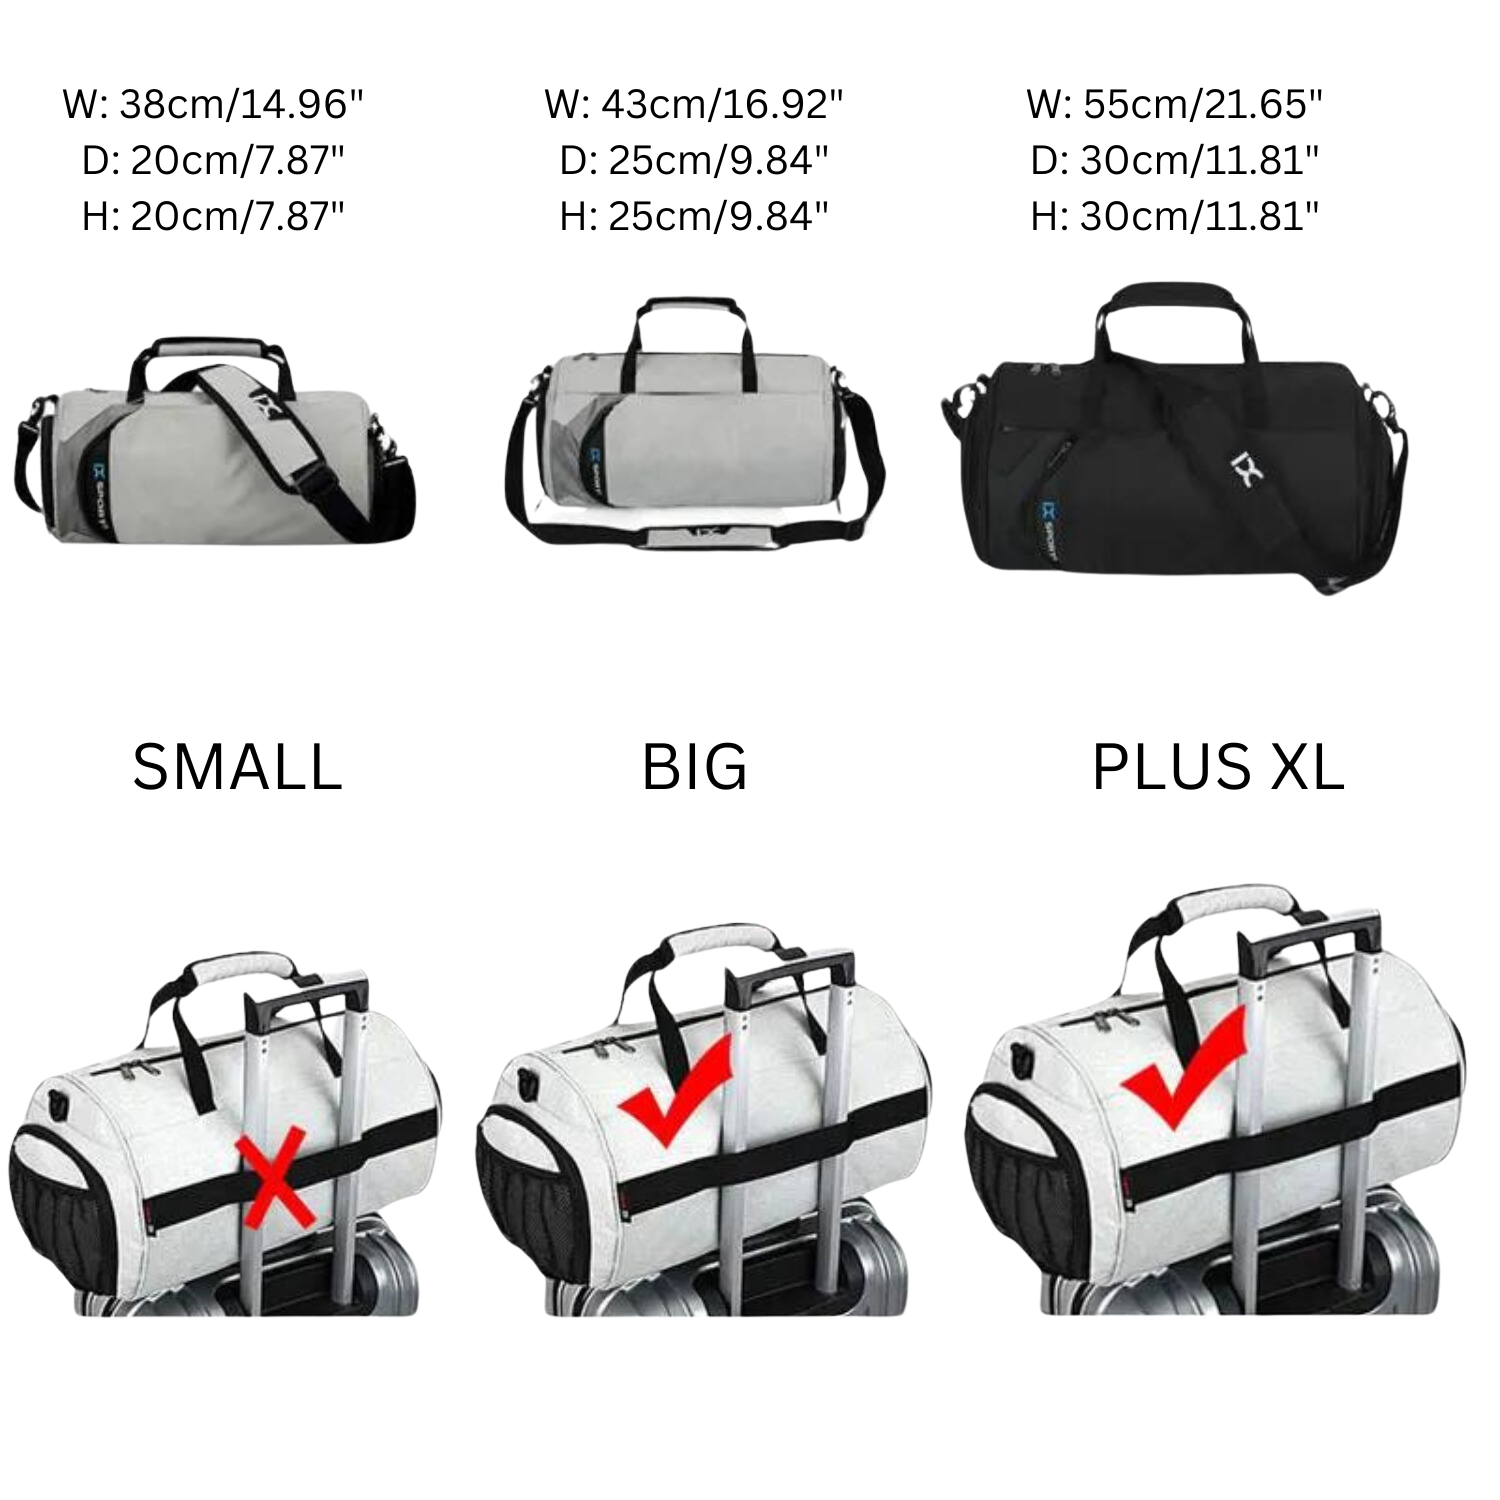 Voyager's Compact: Streamlined Travel Duffle with Shoe Compartment